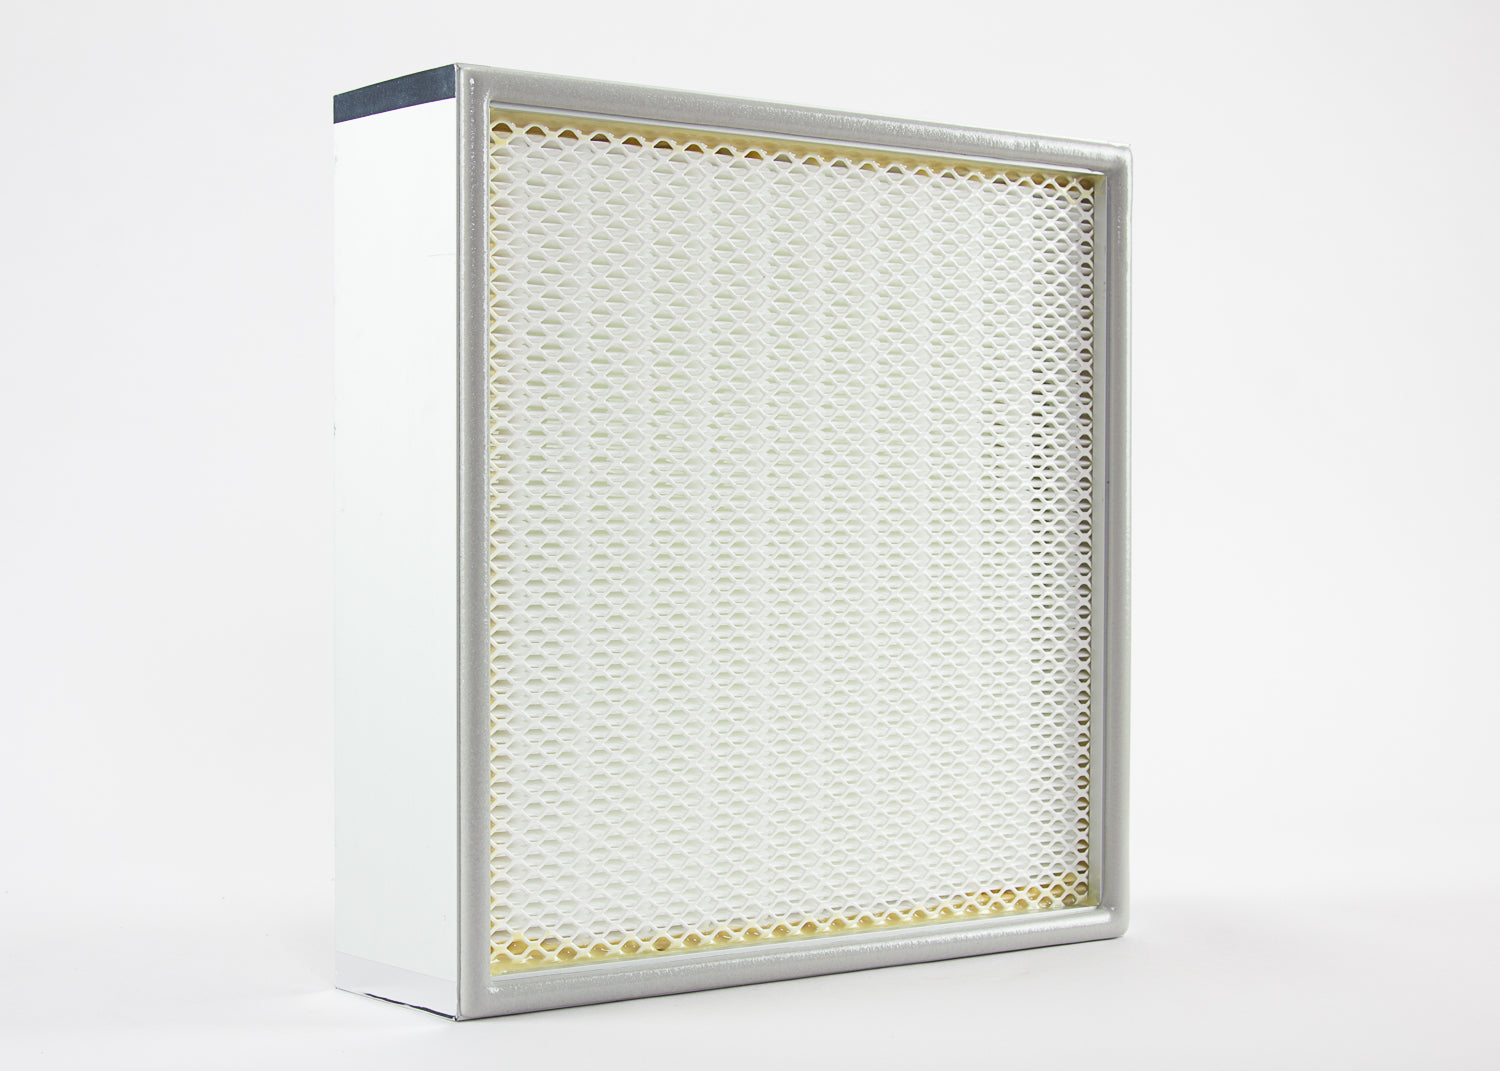 air purification filter HEPA filter with metal case and filter screen